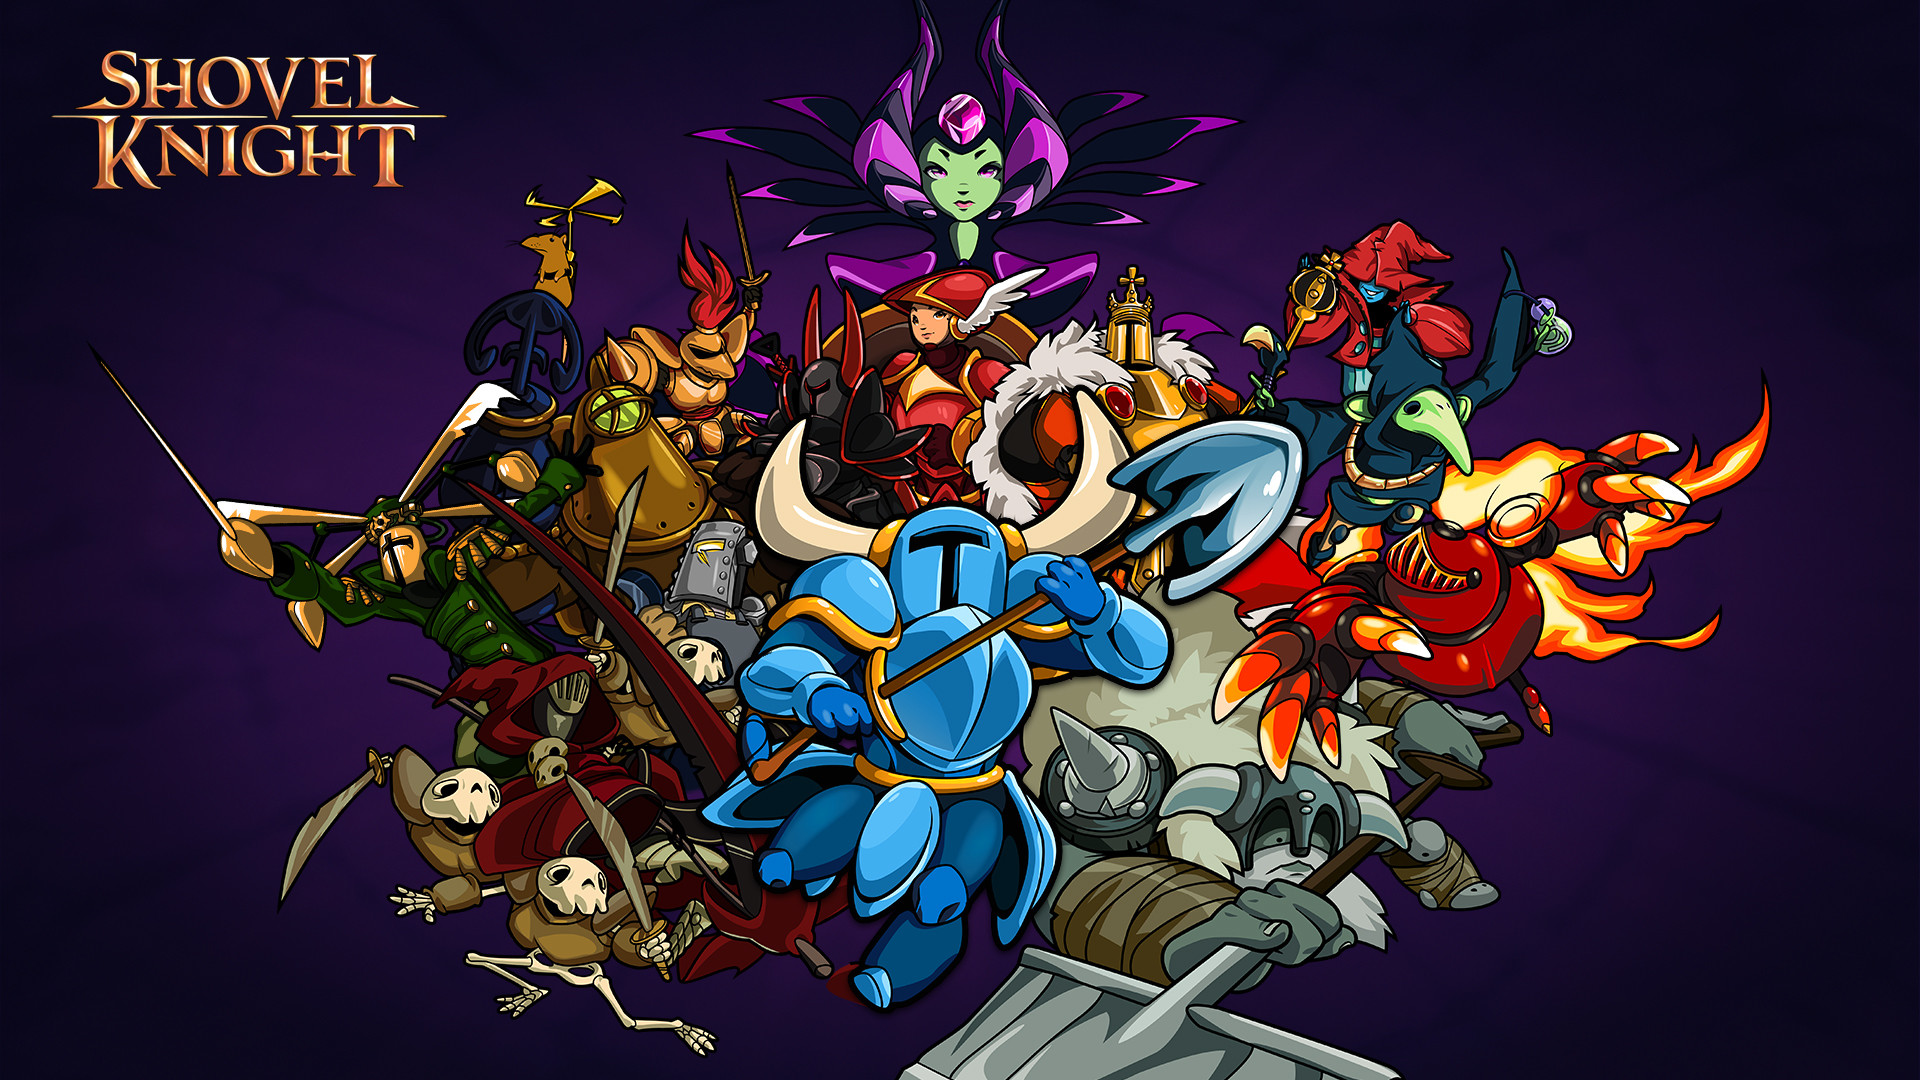 1920x1080 7 HD Shovel Knight Game Wallpapers